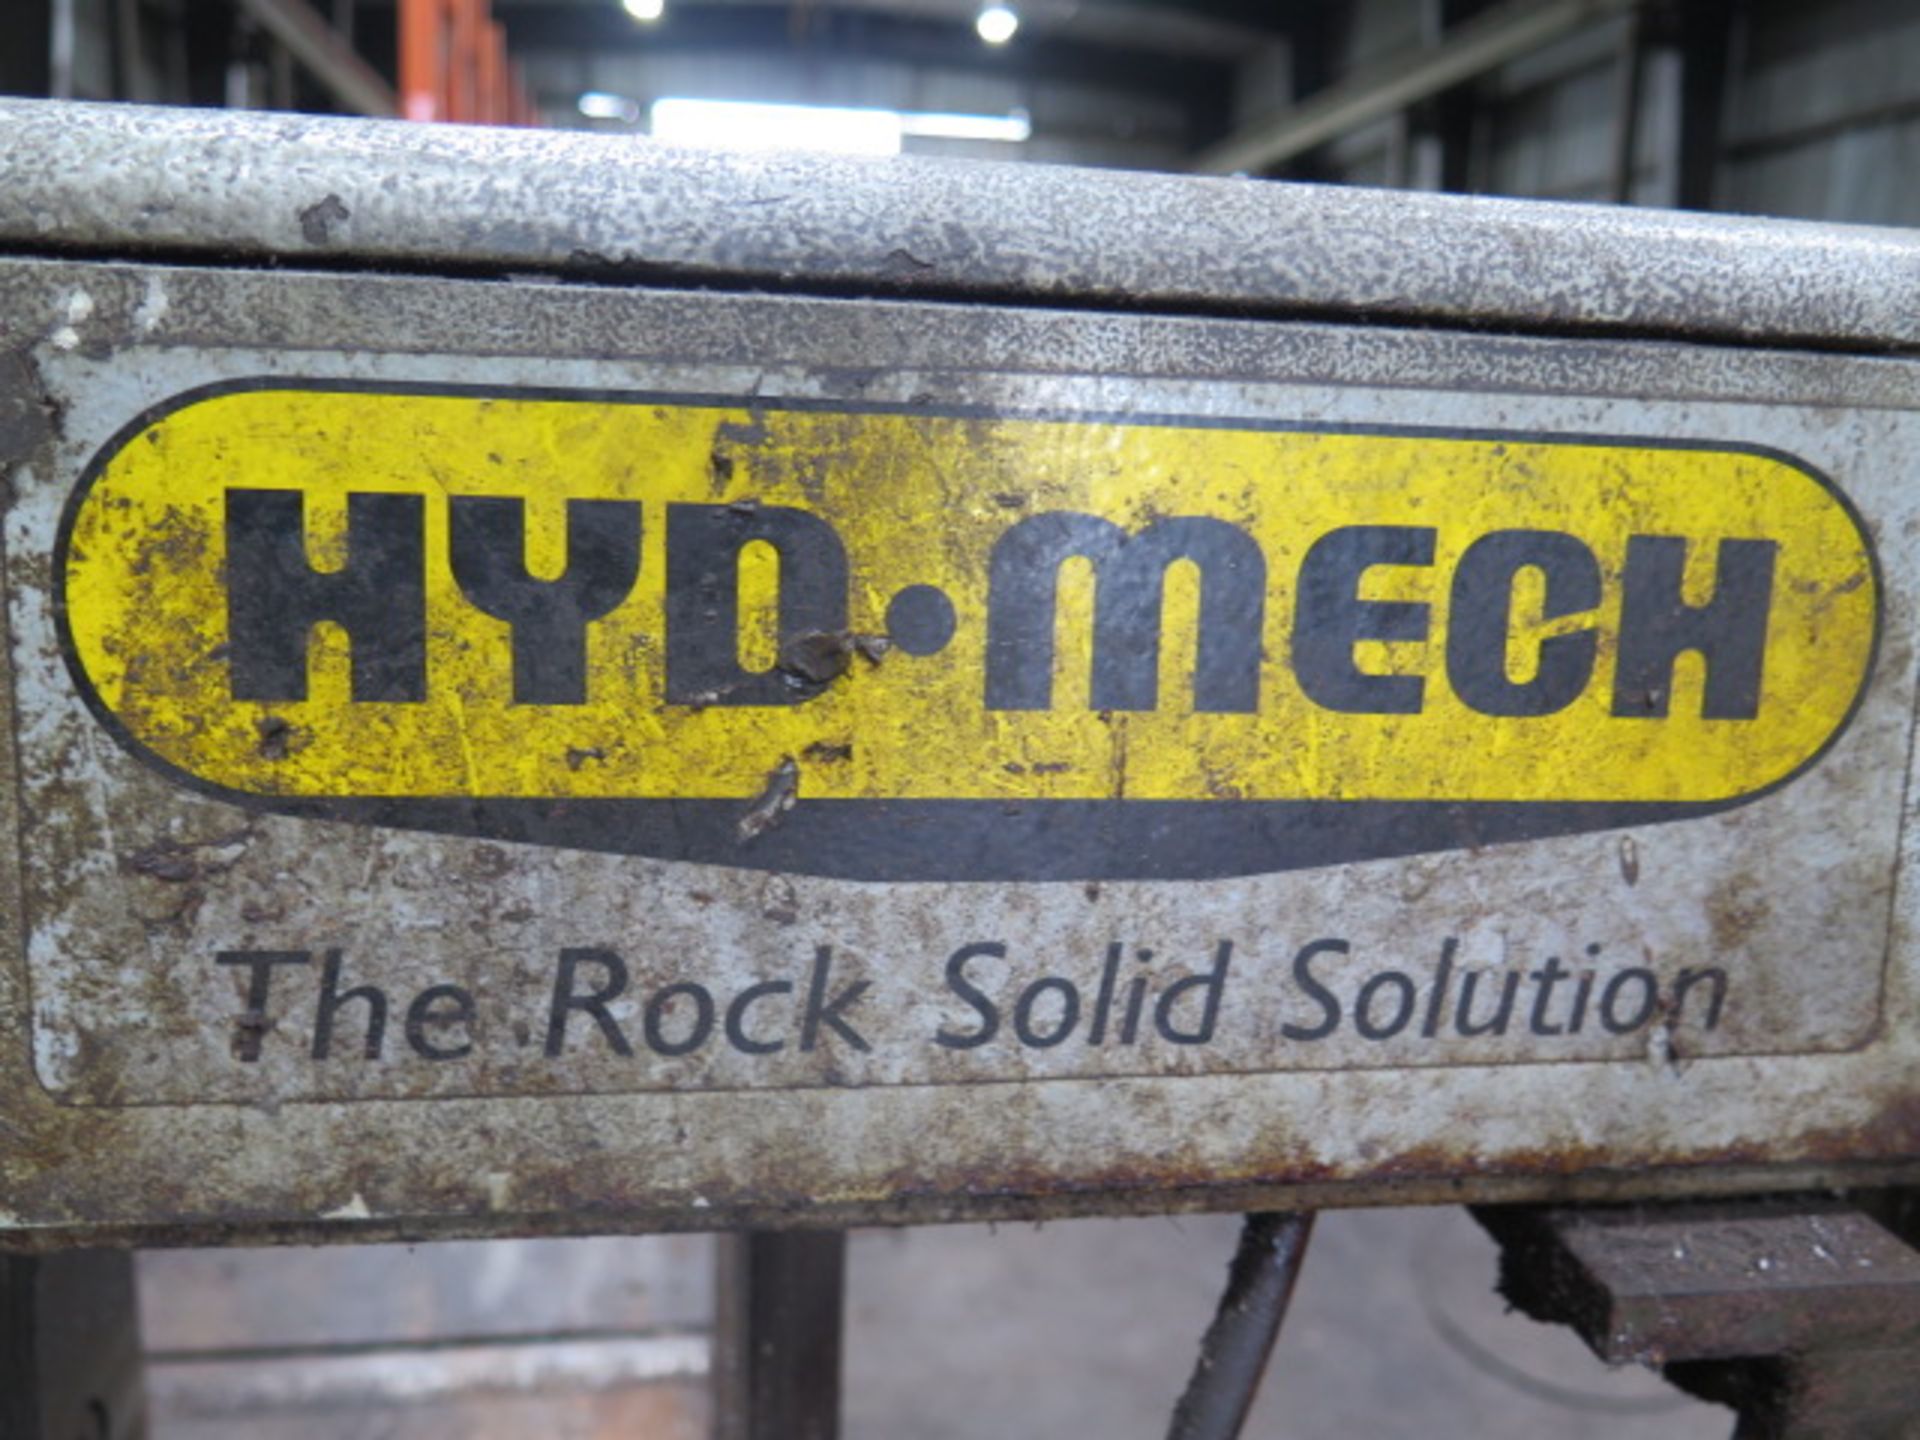 Hyd-Mech S-20P Series III 13” Horizontal Band Saw w/ Hyd-Mech Controls, Hyd Clamping, SOLD AS IS - Image 9 of 11